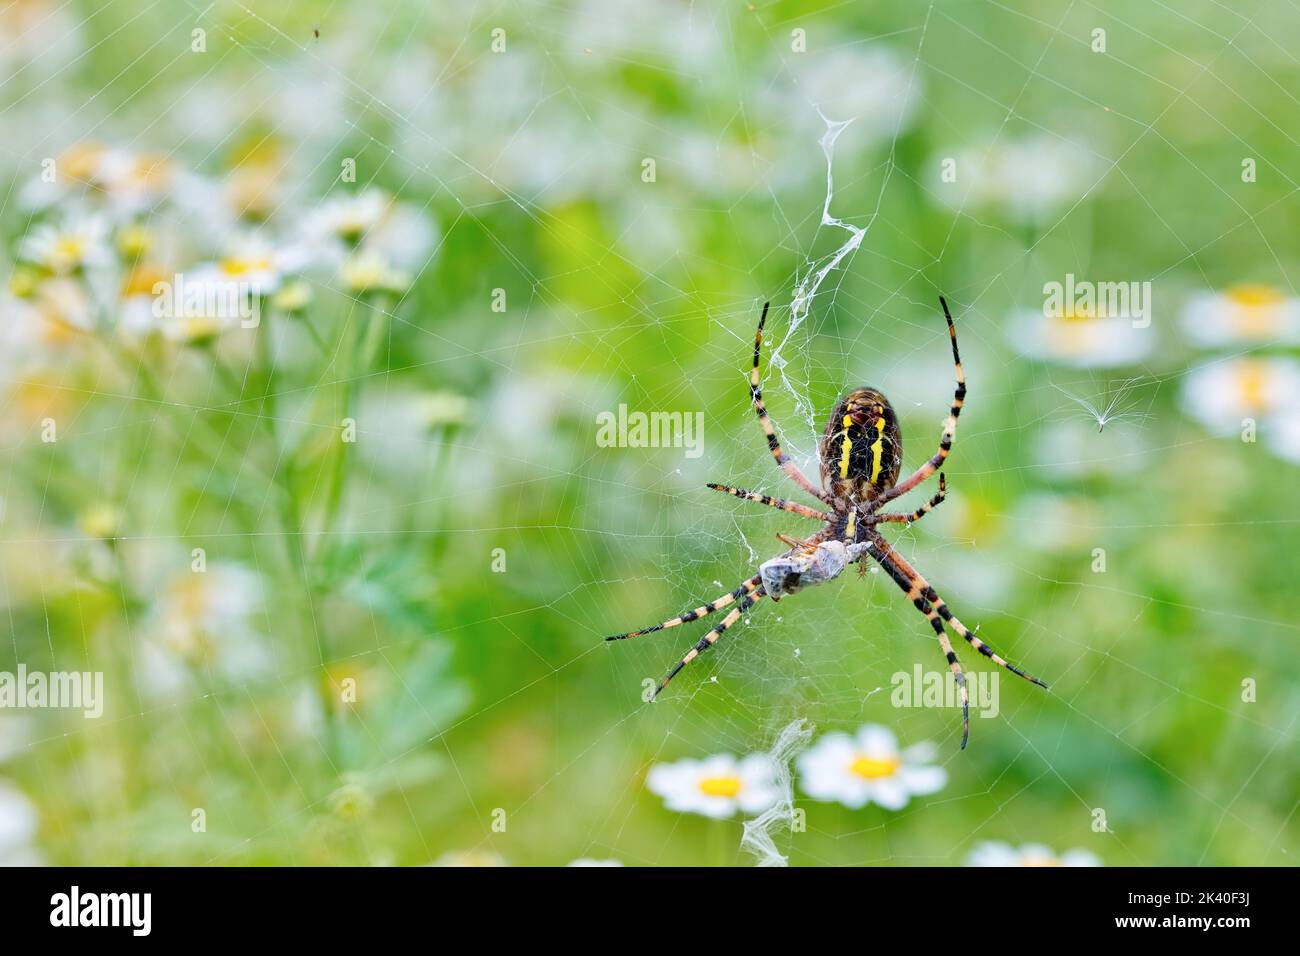 Black-and-yellow argiope, Black-and-yellow garden spider (Argiope bruennichi), with prey in the cobweb, view from below, Germany Stock Photo